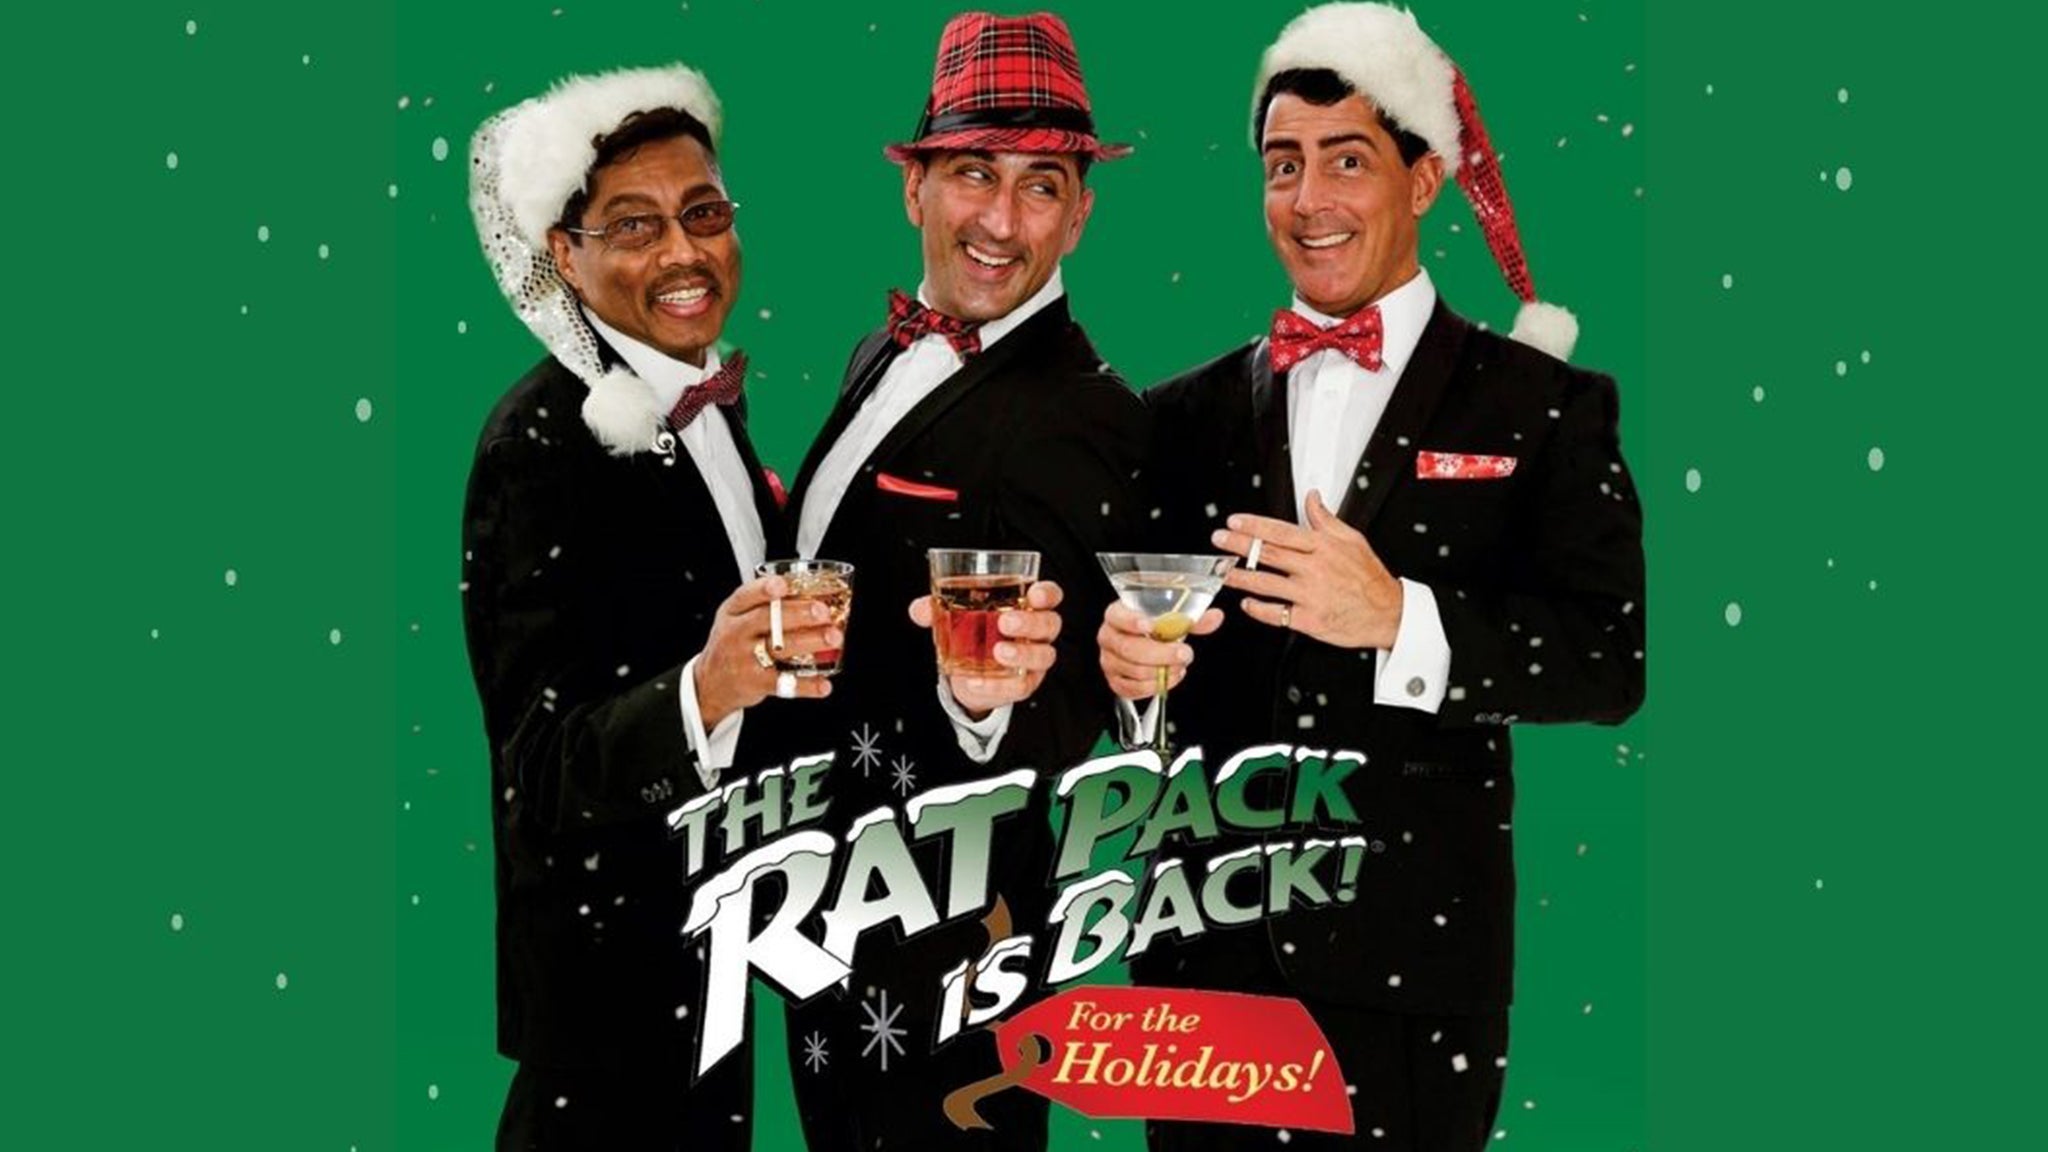 The Rat Pack is Back for The Holidays! in Elkhart promo photo for Friends of the Lerner presale offer code